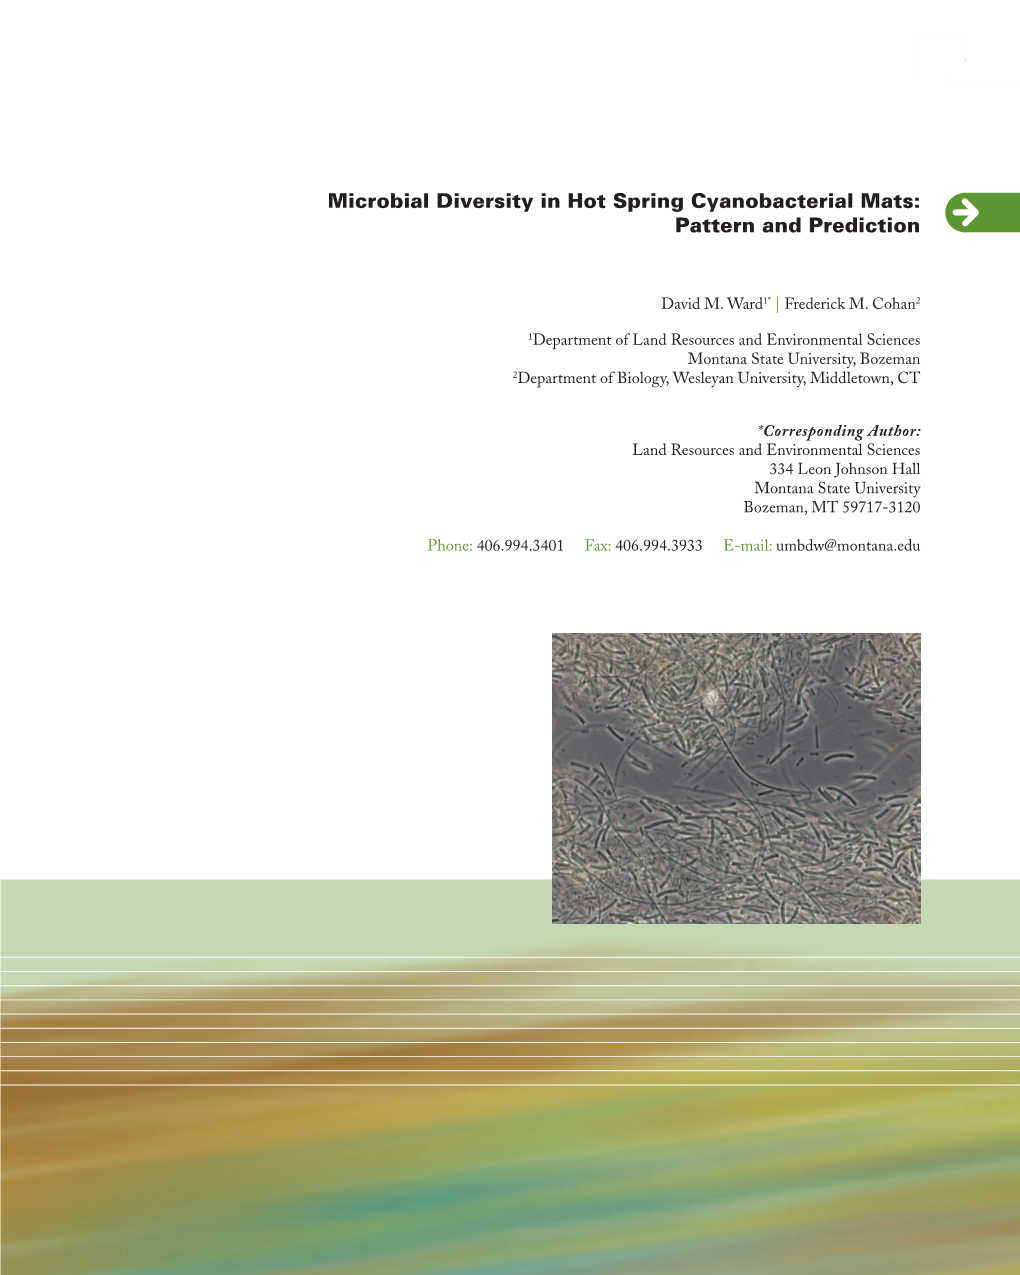 Microbial Diversity in Hot Spring Cyanobacterial Mats:Pattern And